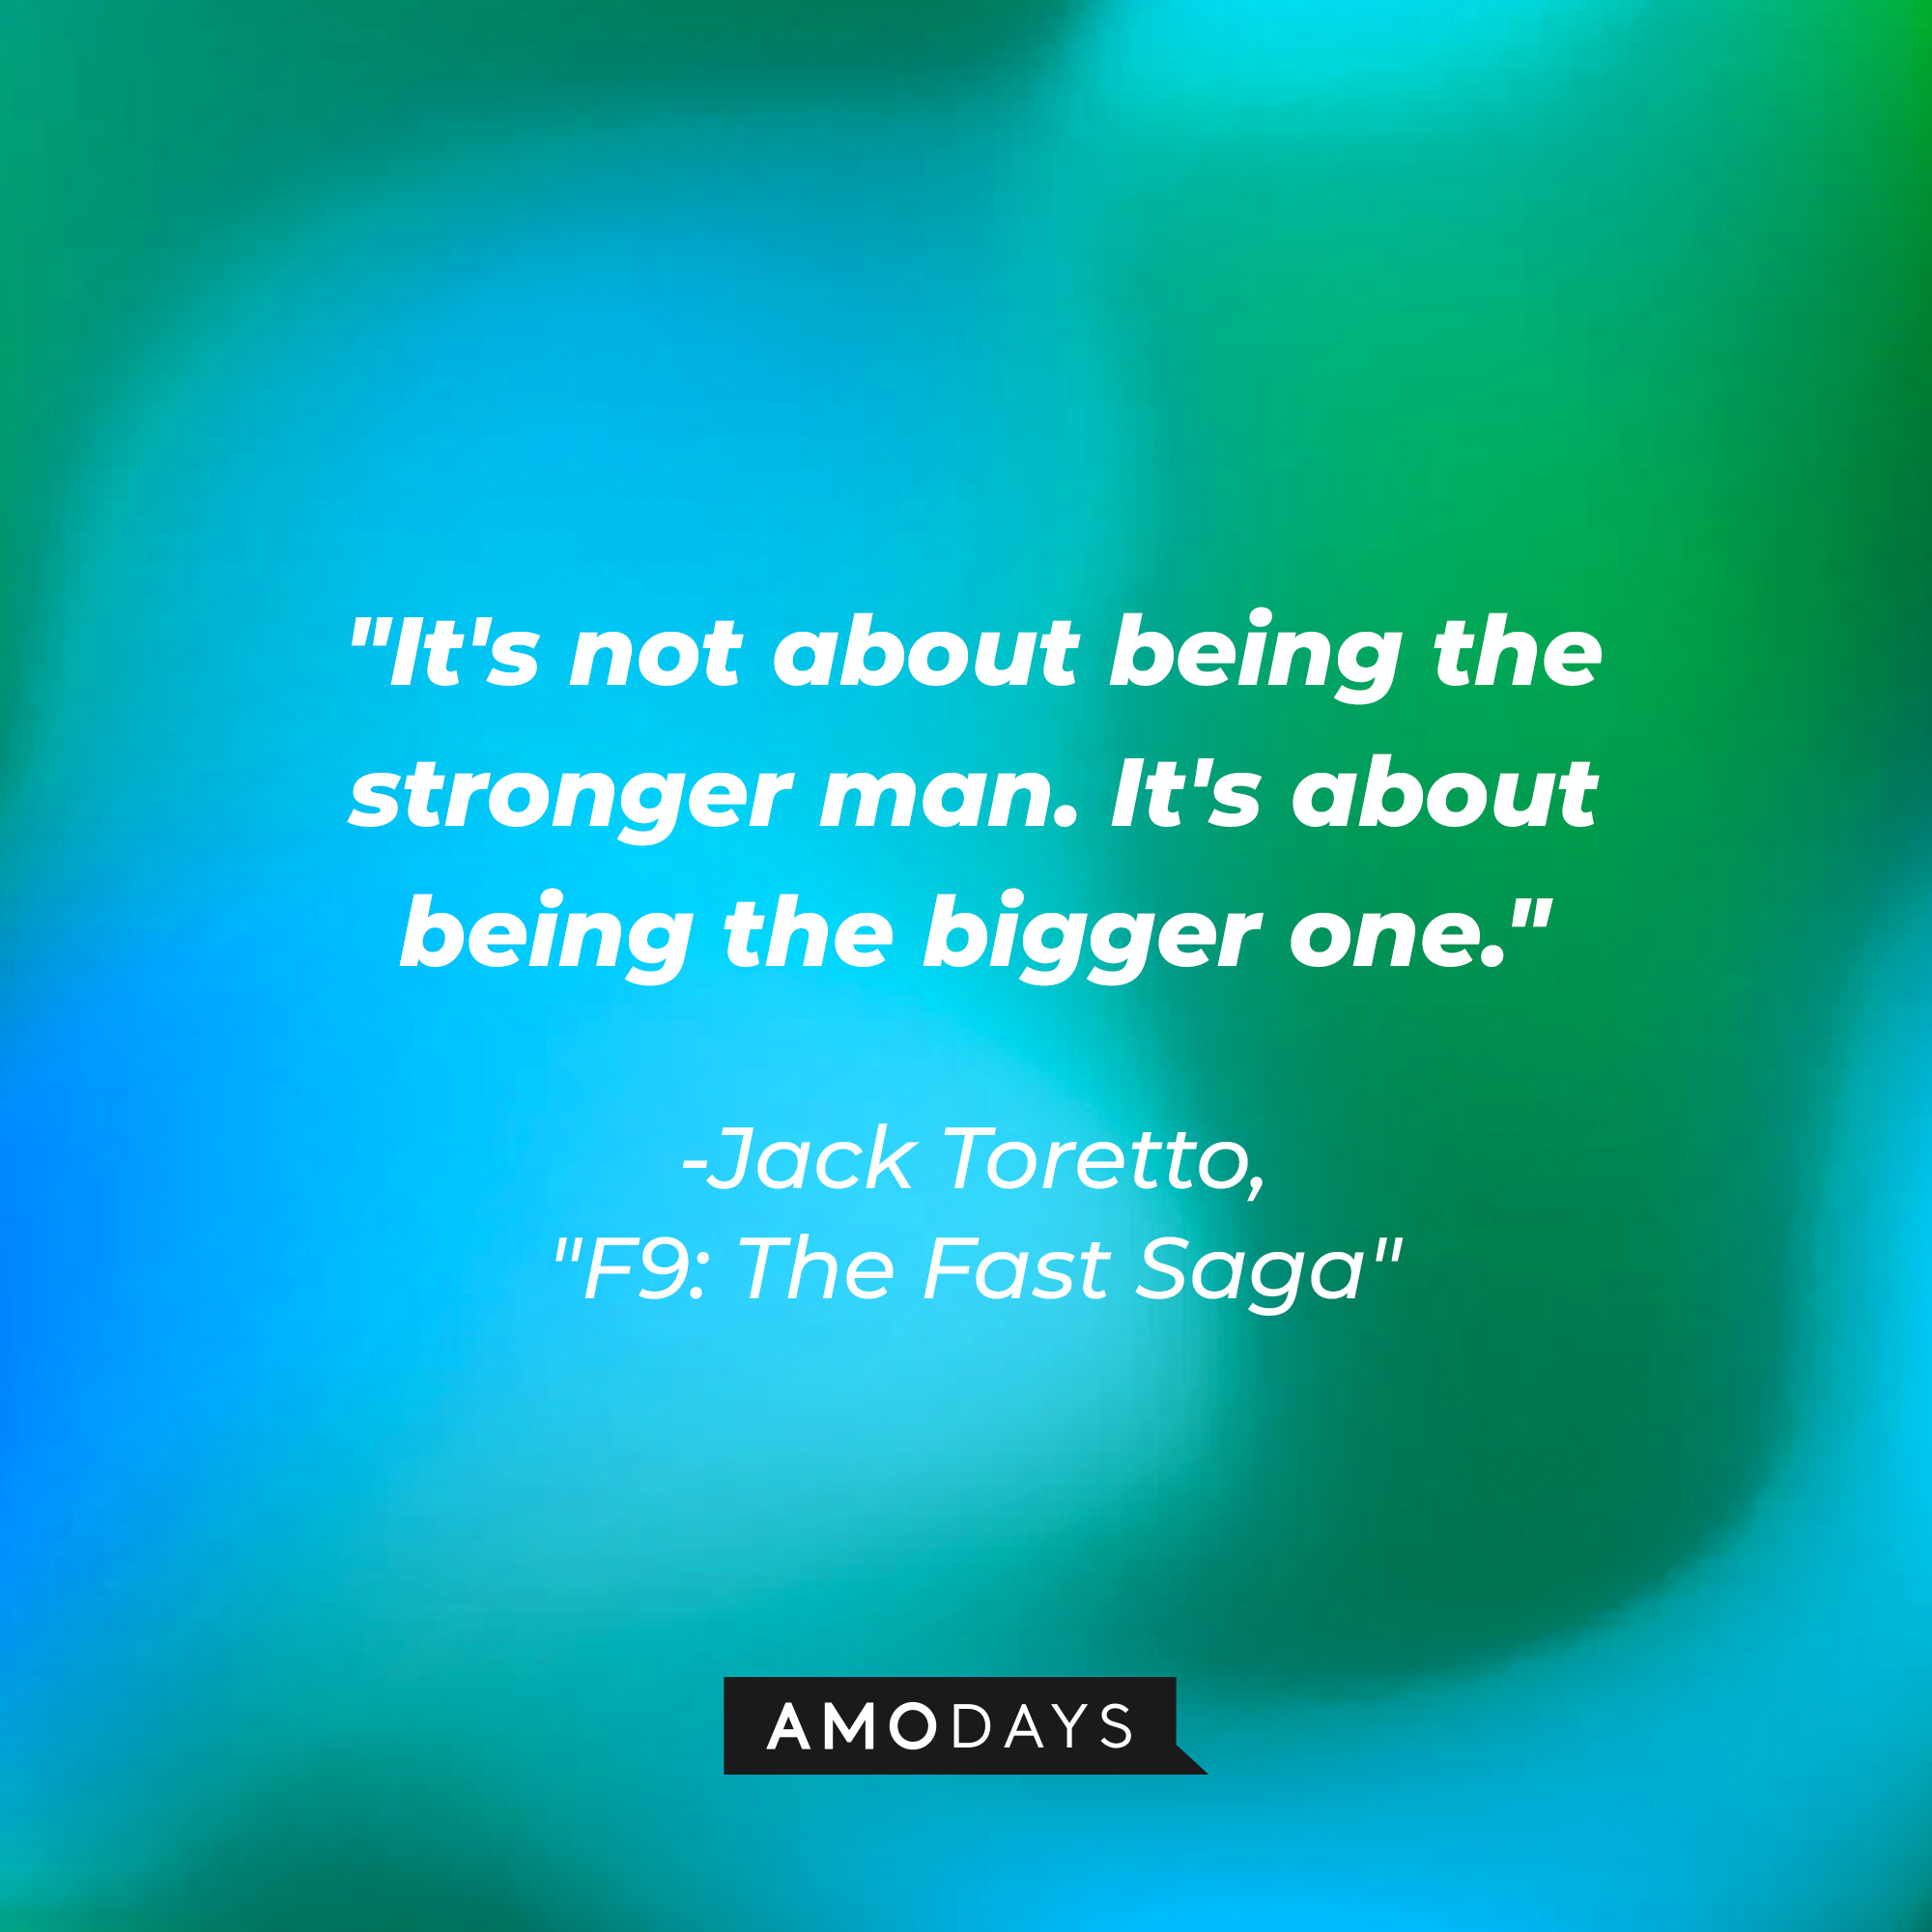 Jack Toretto’s quote: "It's not about being the stronger man. It's about being the bigger one." | Image: AmoDays